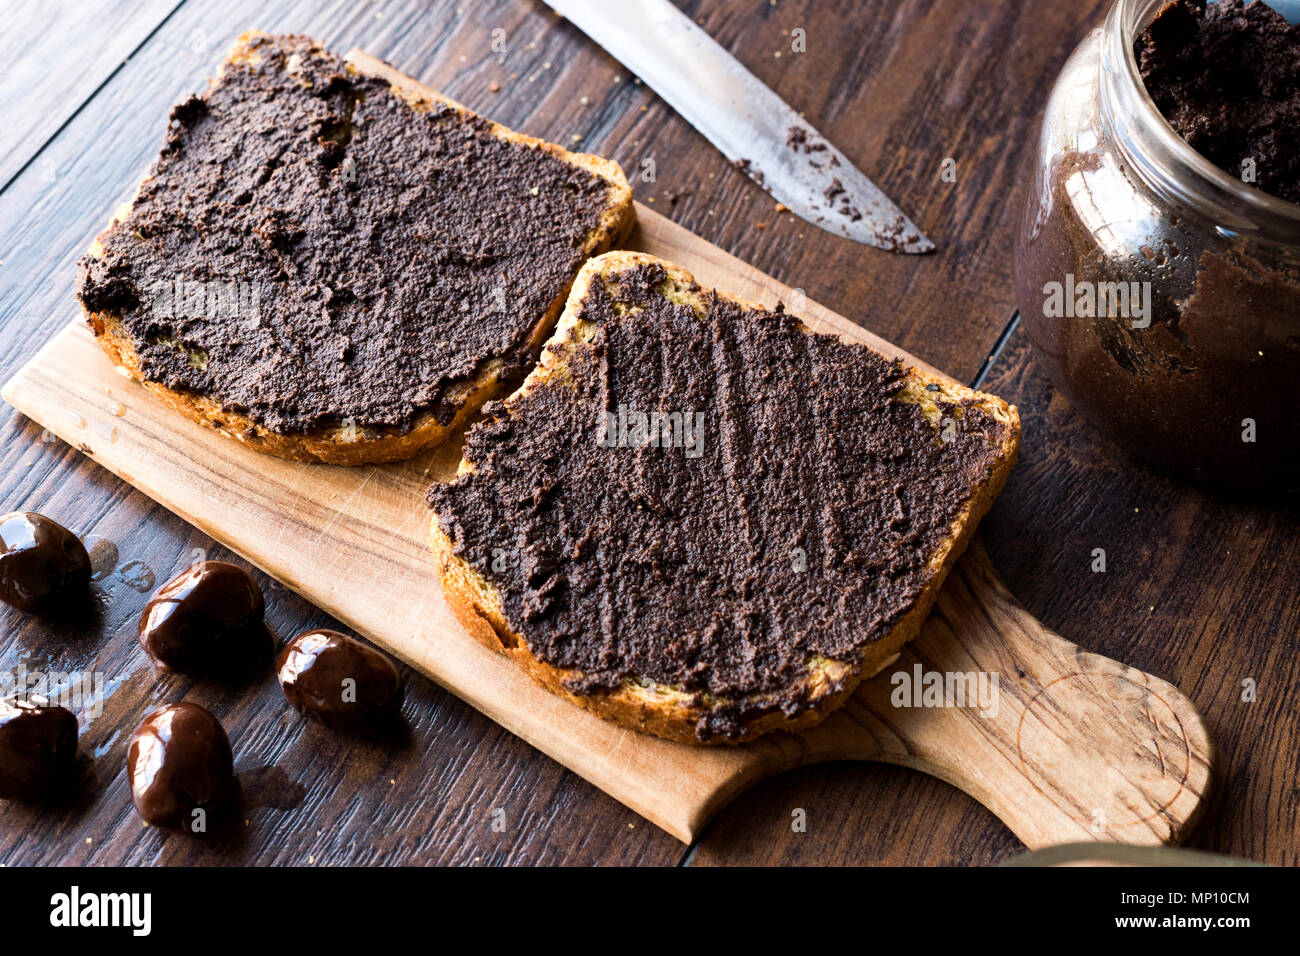 Black Olive Tapenade on Bread with Knife and Jar. Organic Food. Stock Photo